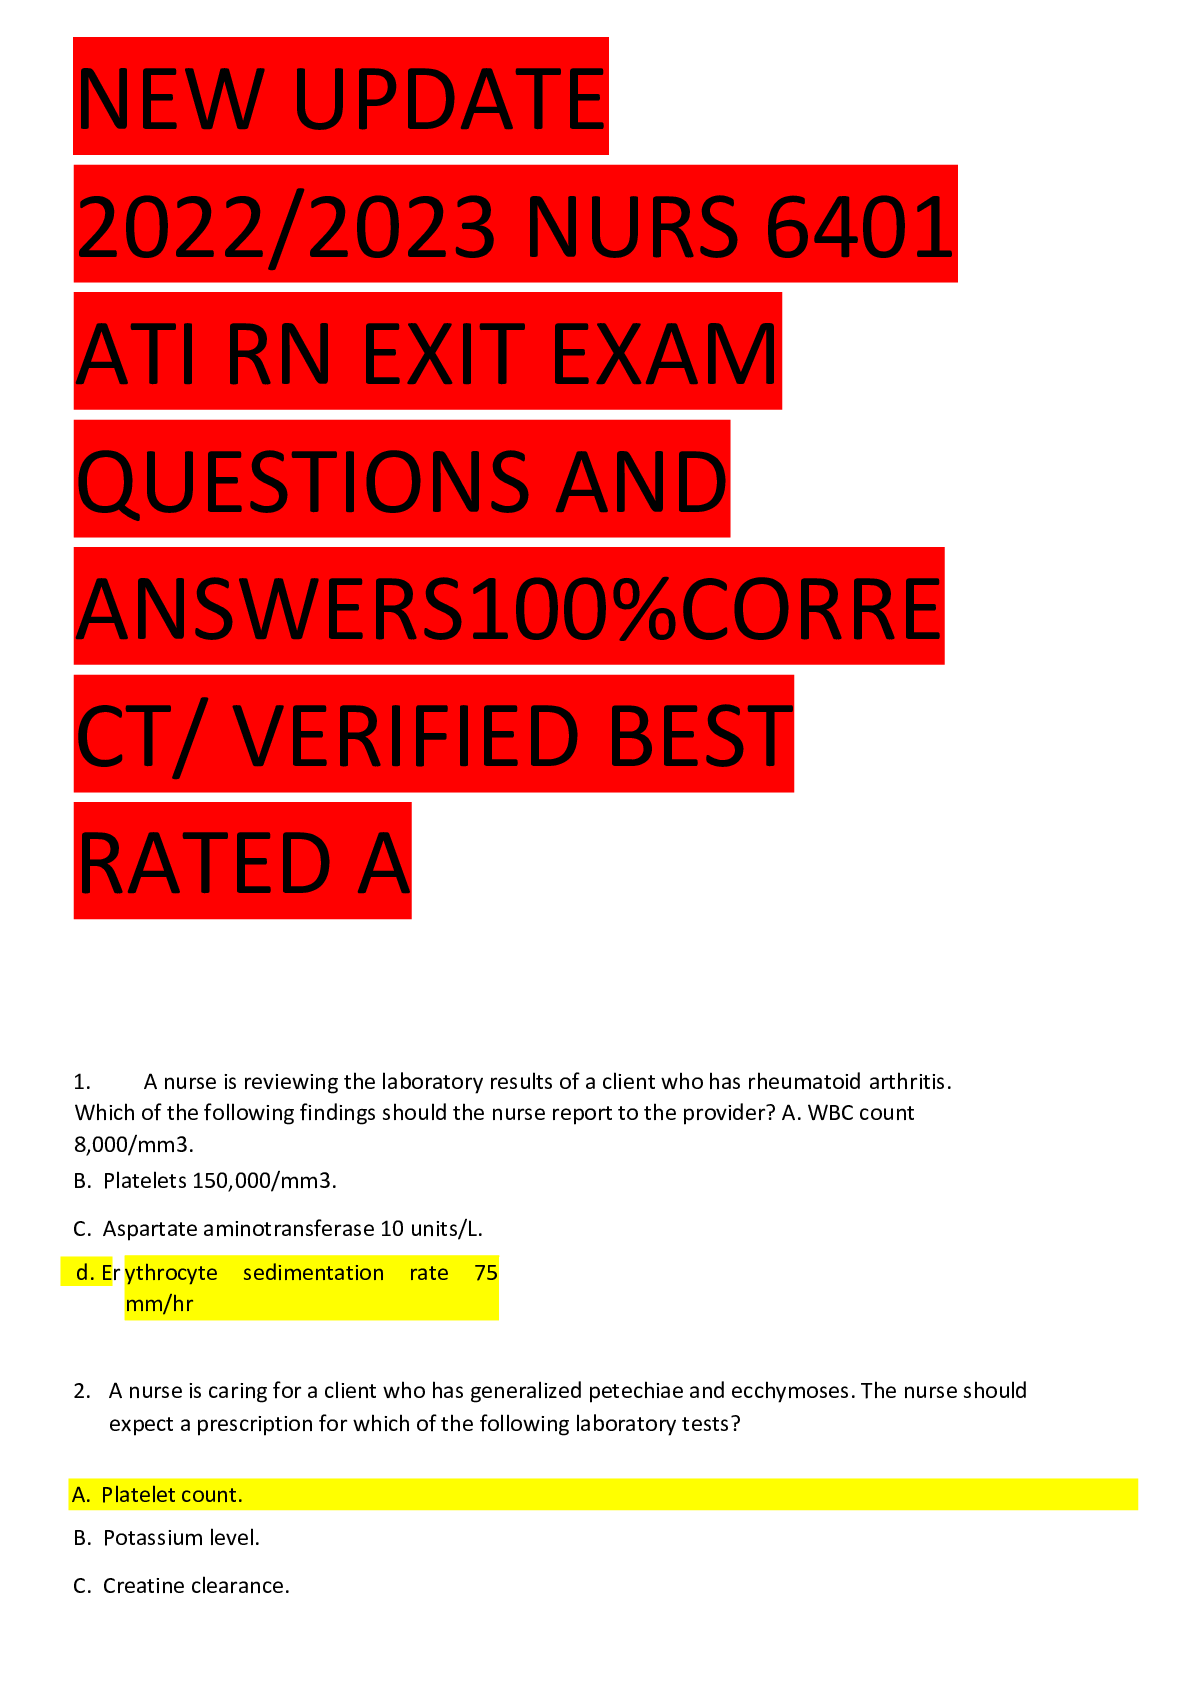 NEW UPDATE 2022/2023 NURS 6401 ATI RN EXIT EXAM QUESTIONS AND